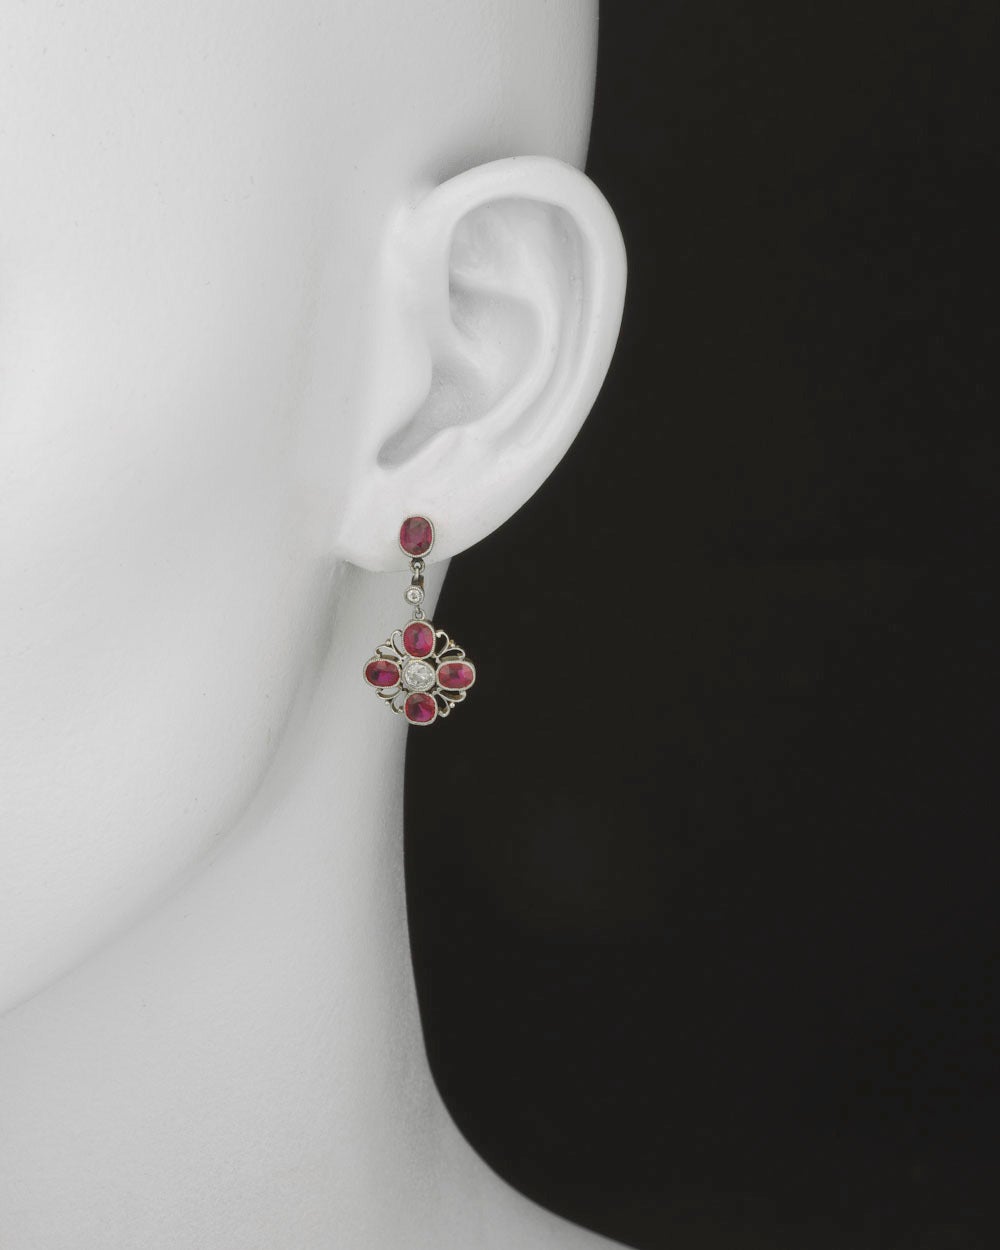 Ruby and diamond pendant earrings, designed as a pierced quatrefoil motif centering on a circular-cut diamond surrounded by four oval-shaped rubies, with an oval-shaped ruby and circular-cut diamond surmount, with ten rubies weighing approximately